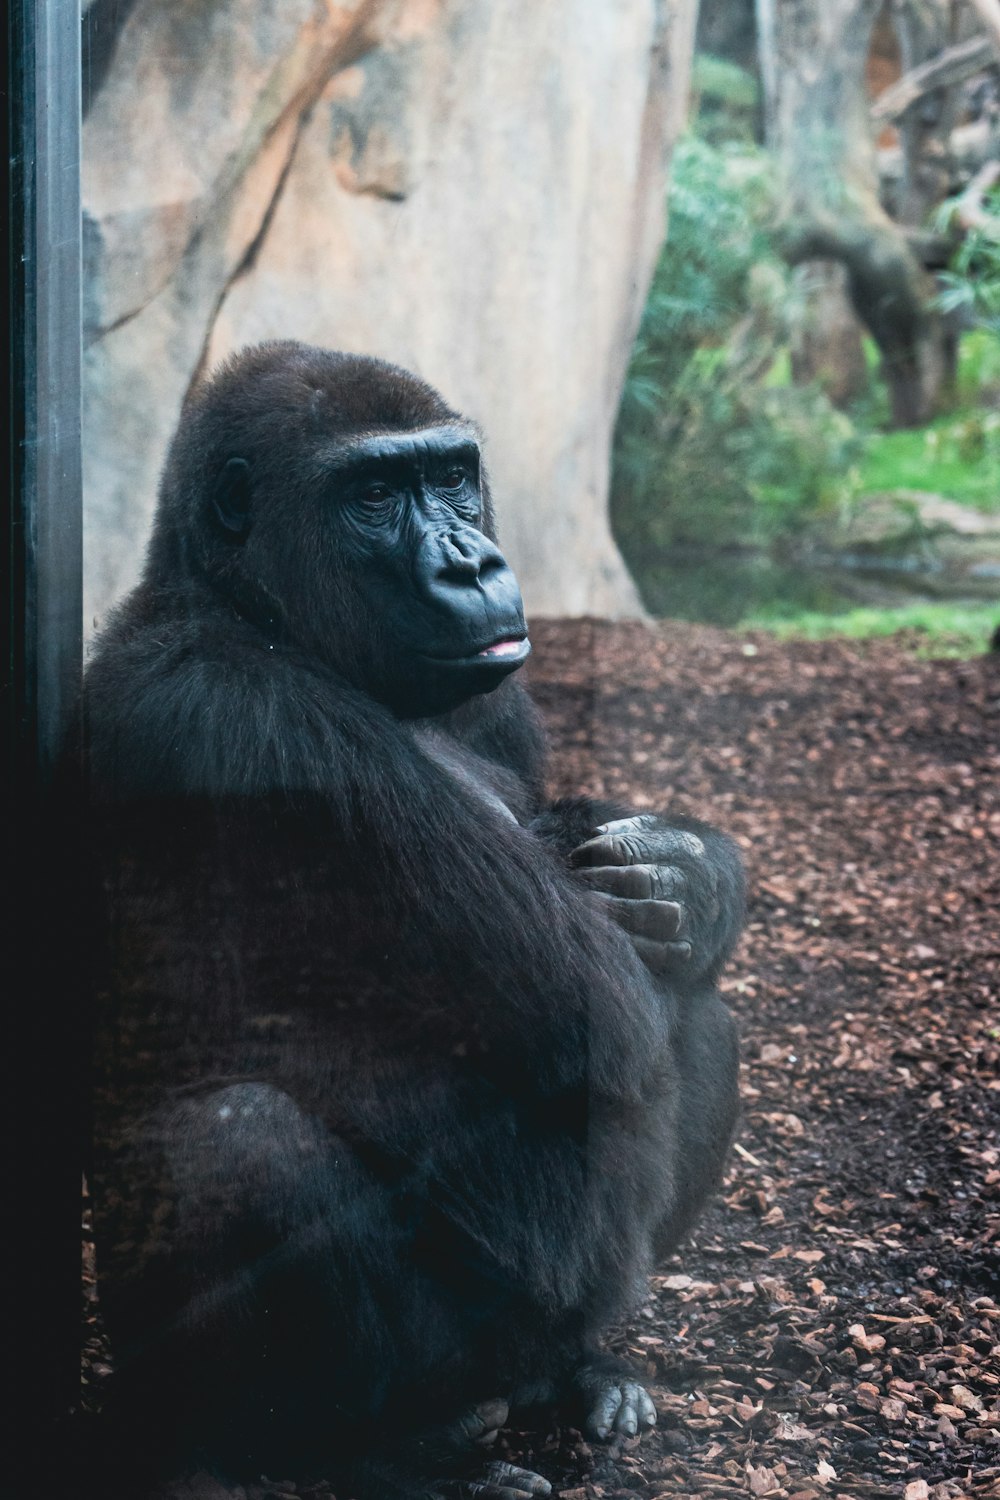 a gorilla sitting on the ground next to a rock